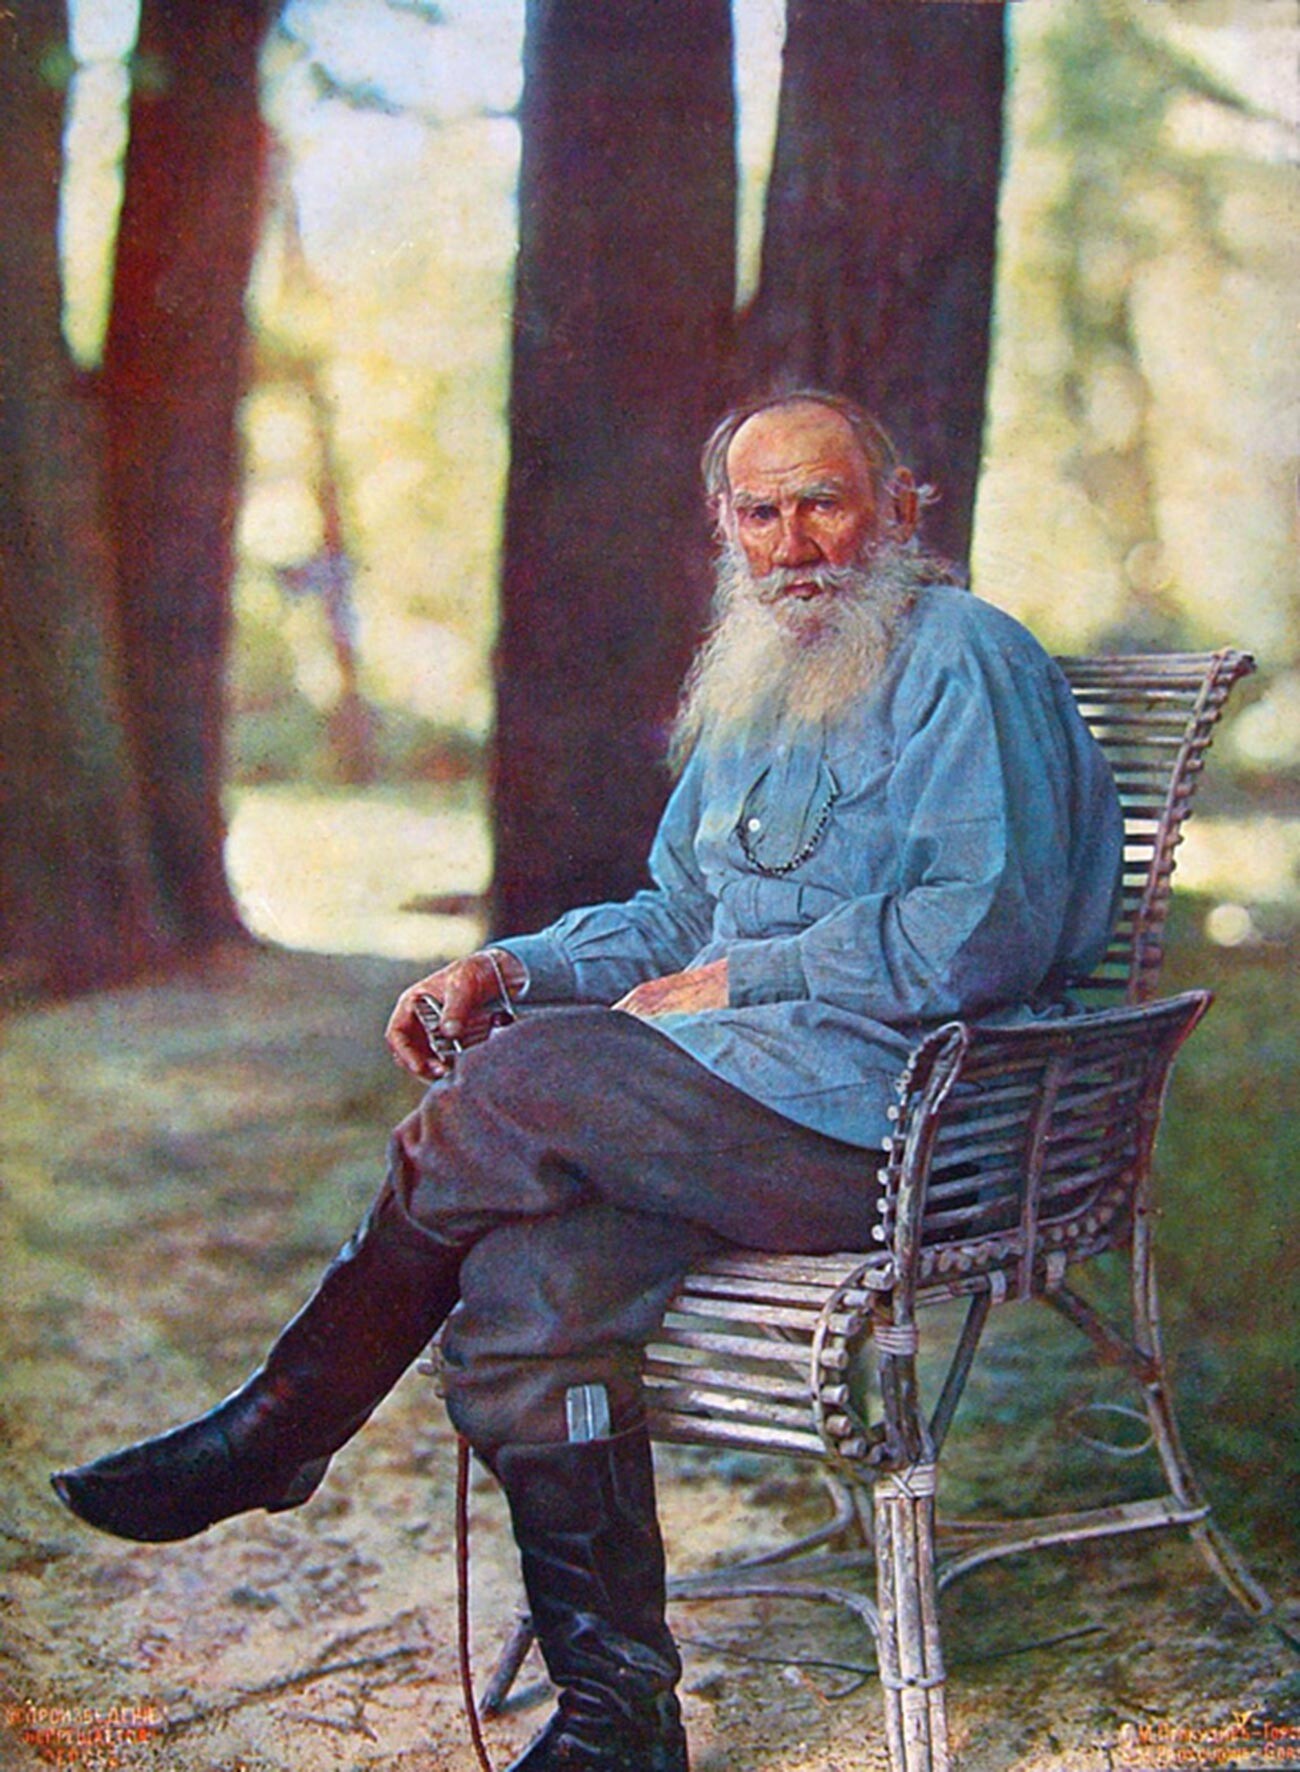 Yasnaya Polyana. Color portrait of Leo Tolstoy taken after his return from horseback riding. First published in August issue of Notes of the Imperial Russian Technical Society. May 23, 1908 